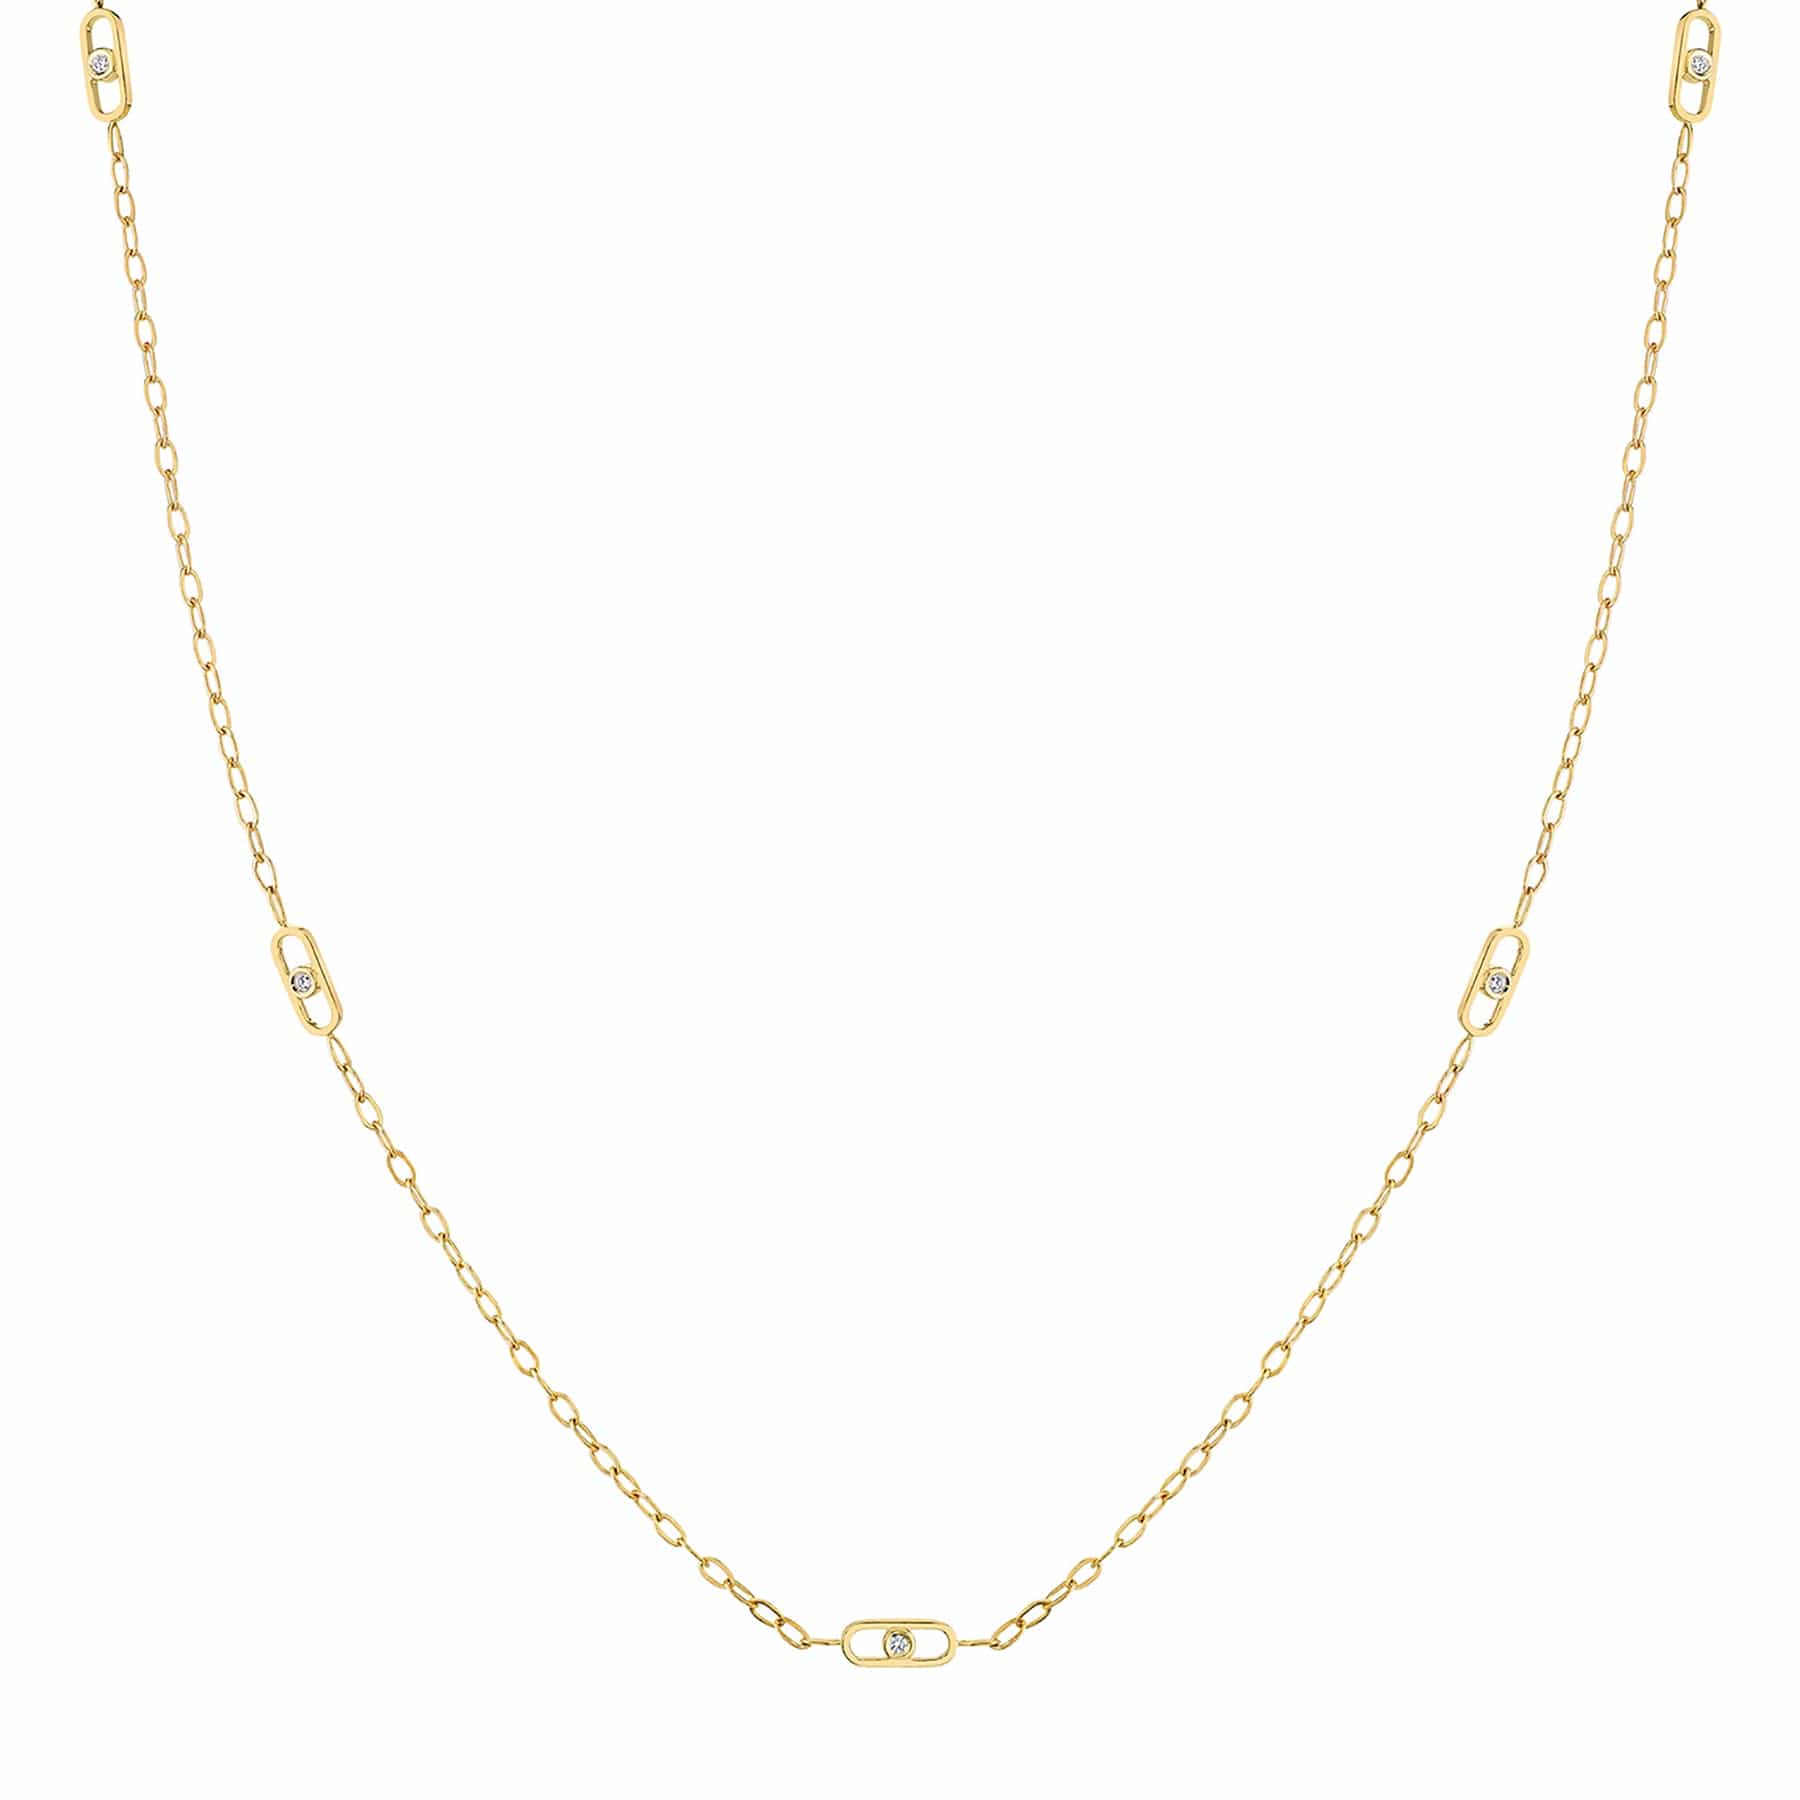 MICHAEL M Necklaces 14K Yellow Gold / 20" Streamlined  Necklace CN351-20"